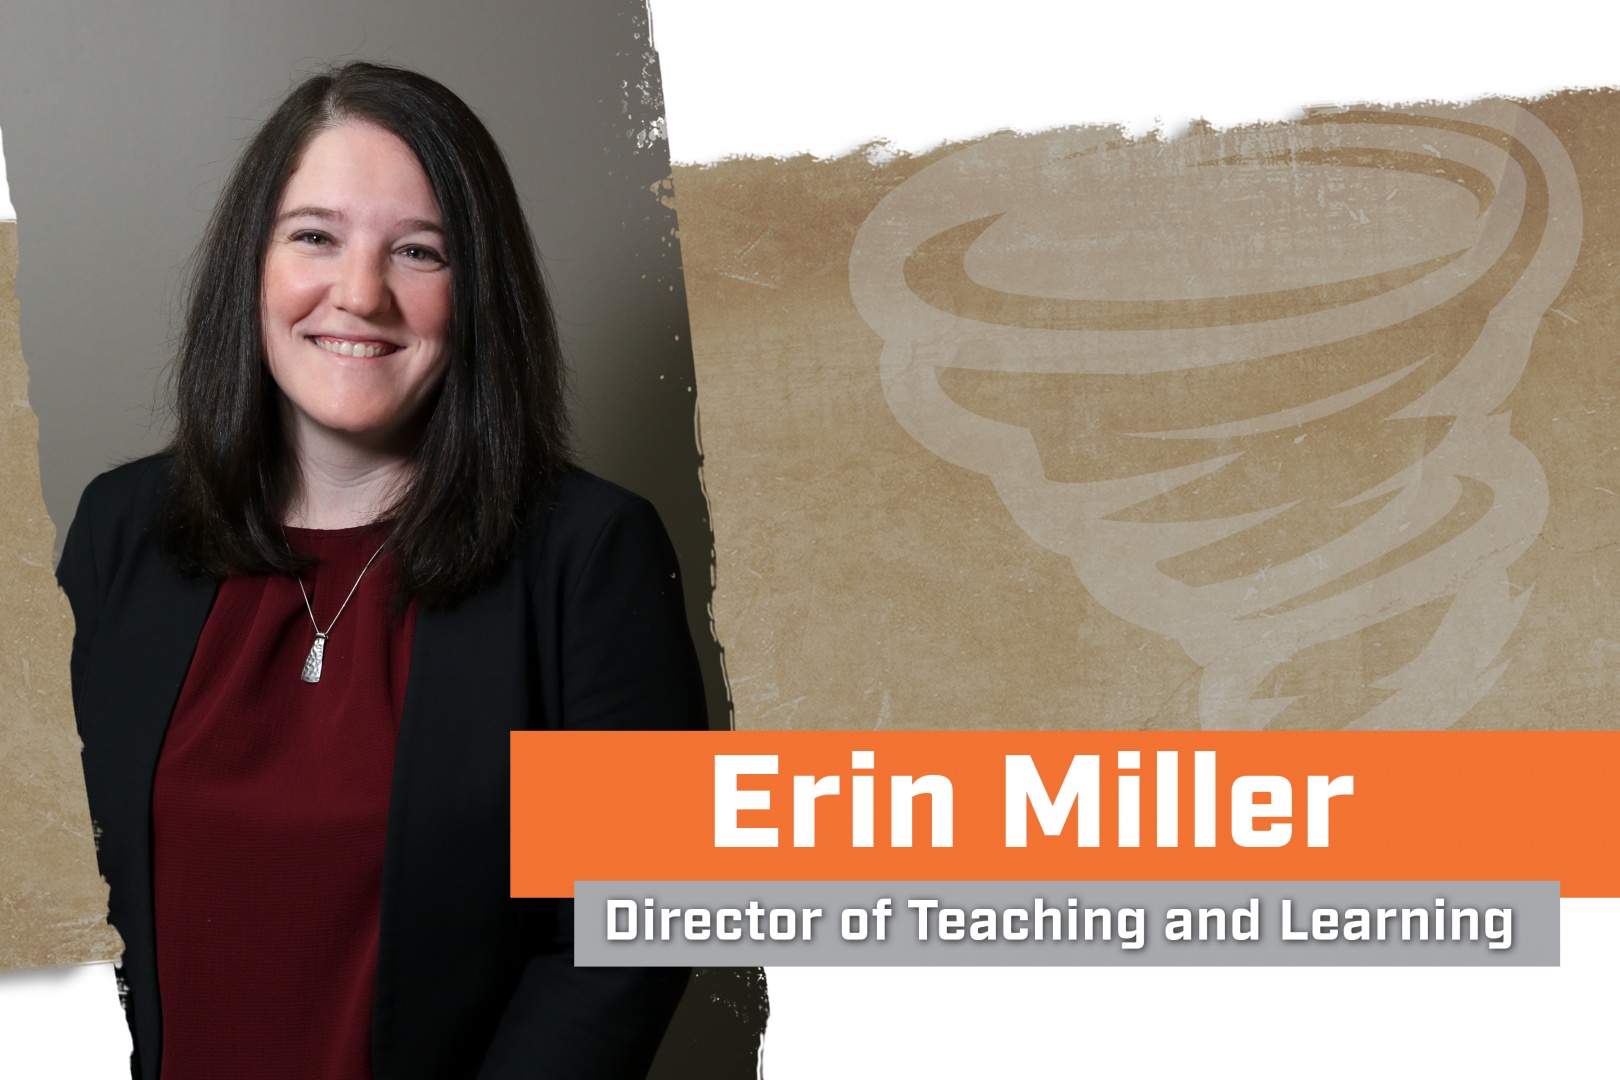 Erin Miller named as new Director of Teaching and Learning